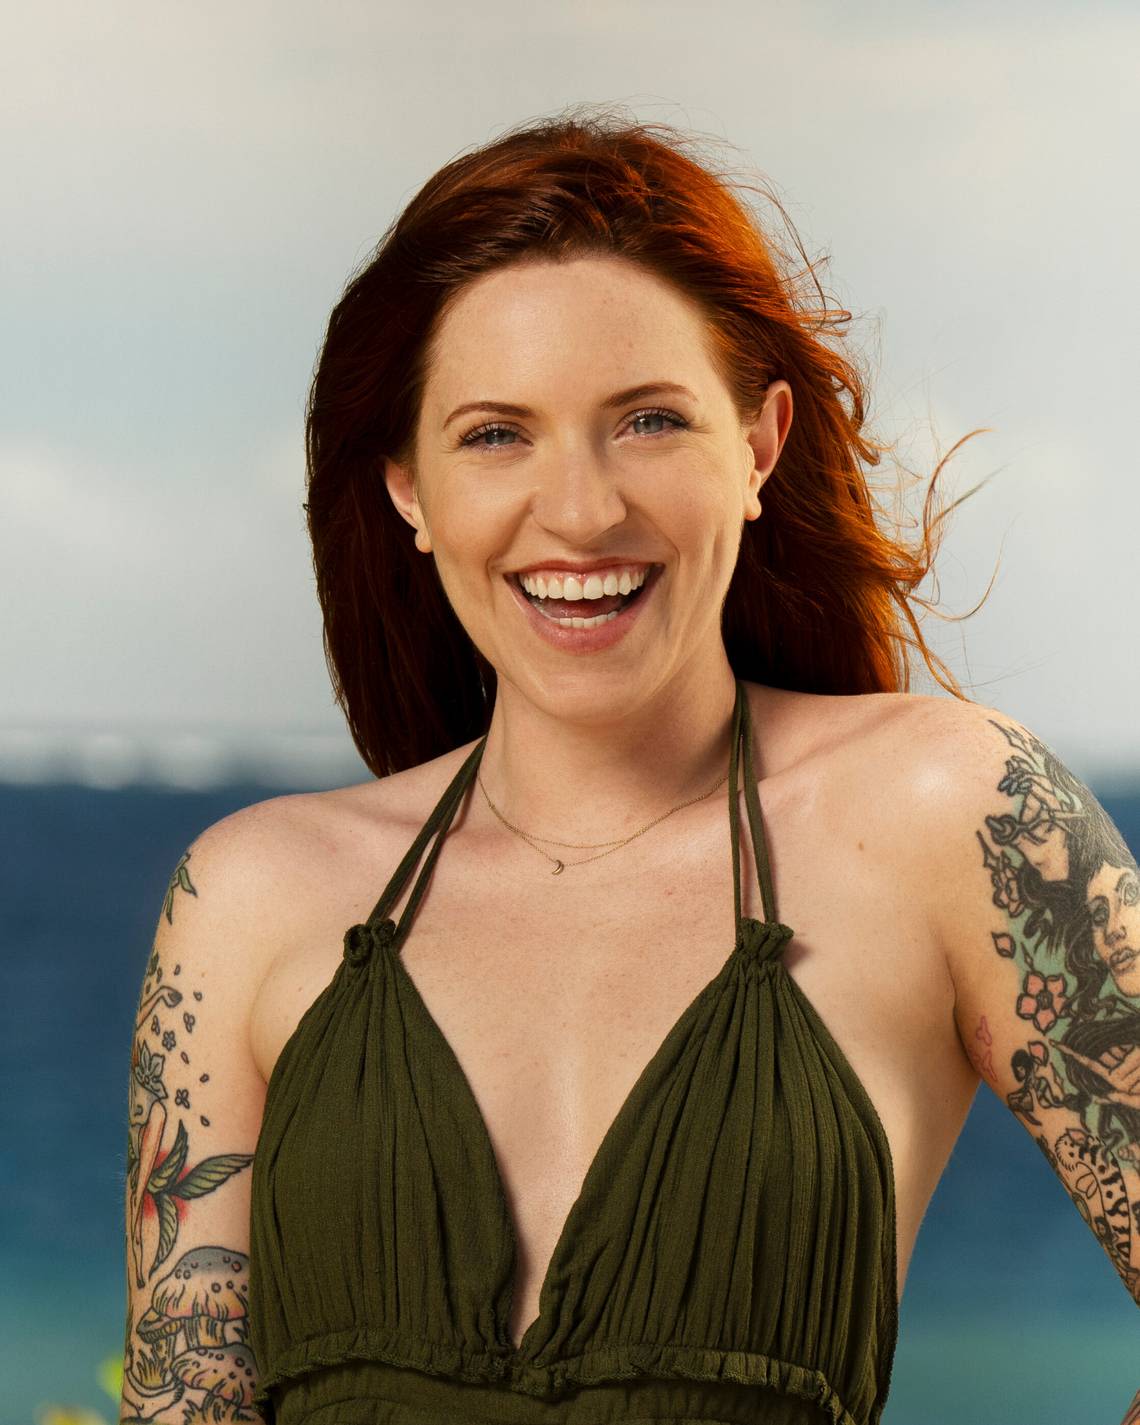 Kenzie Petty could be the first Charlotte resident to win ‘Survivor.’ Here’s what to know